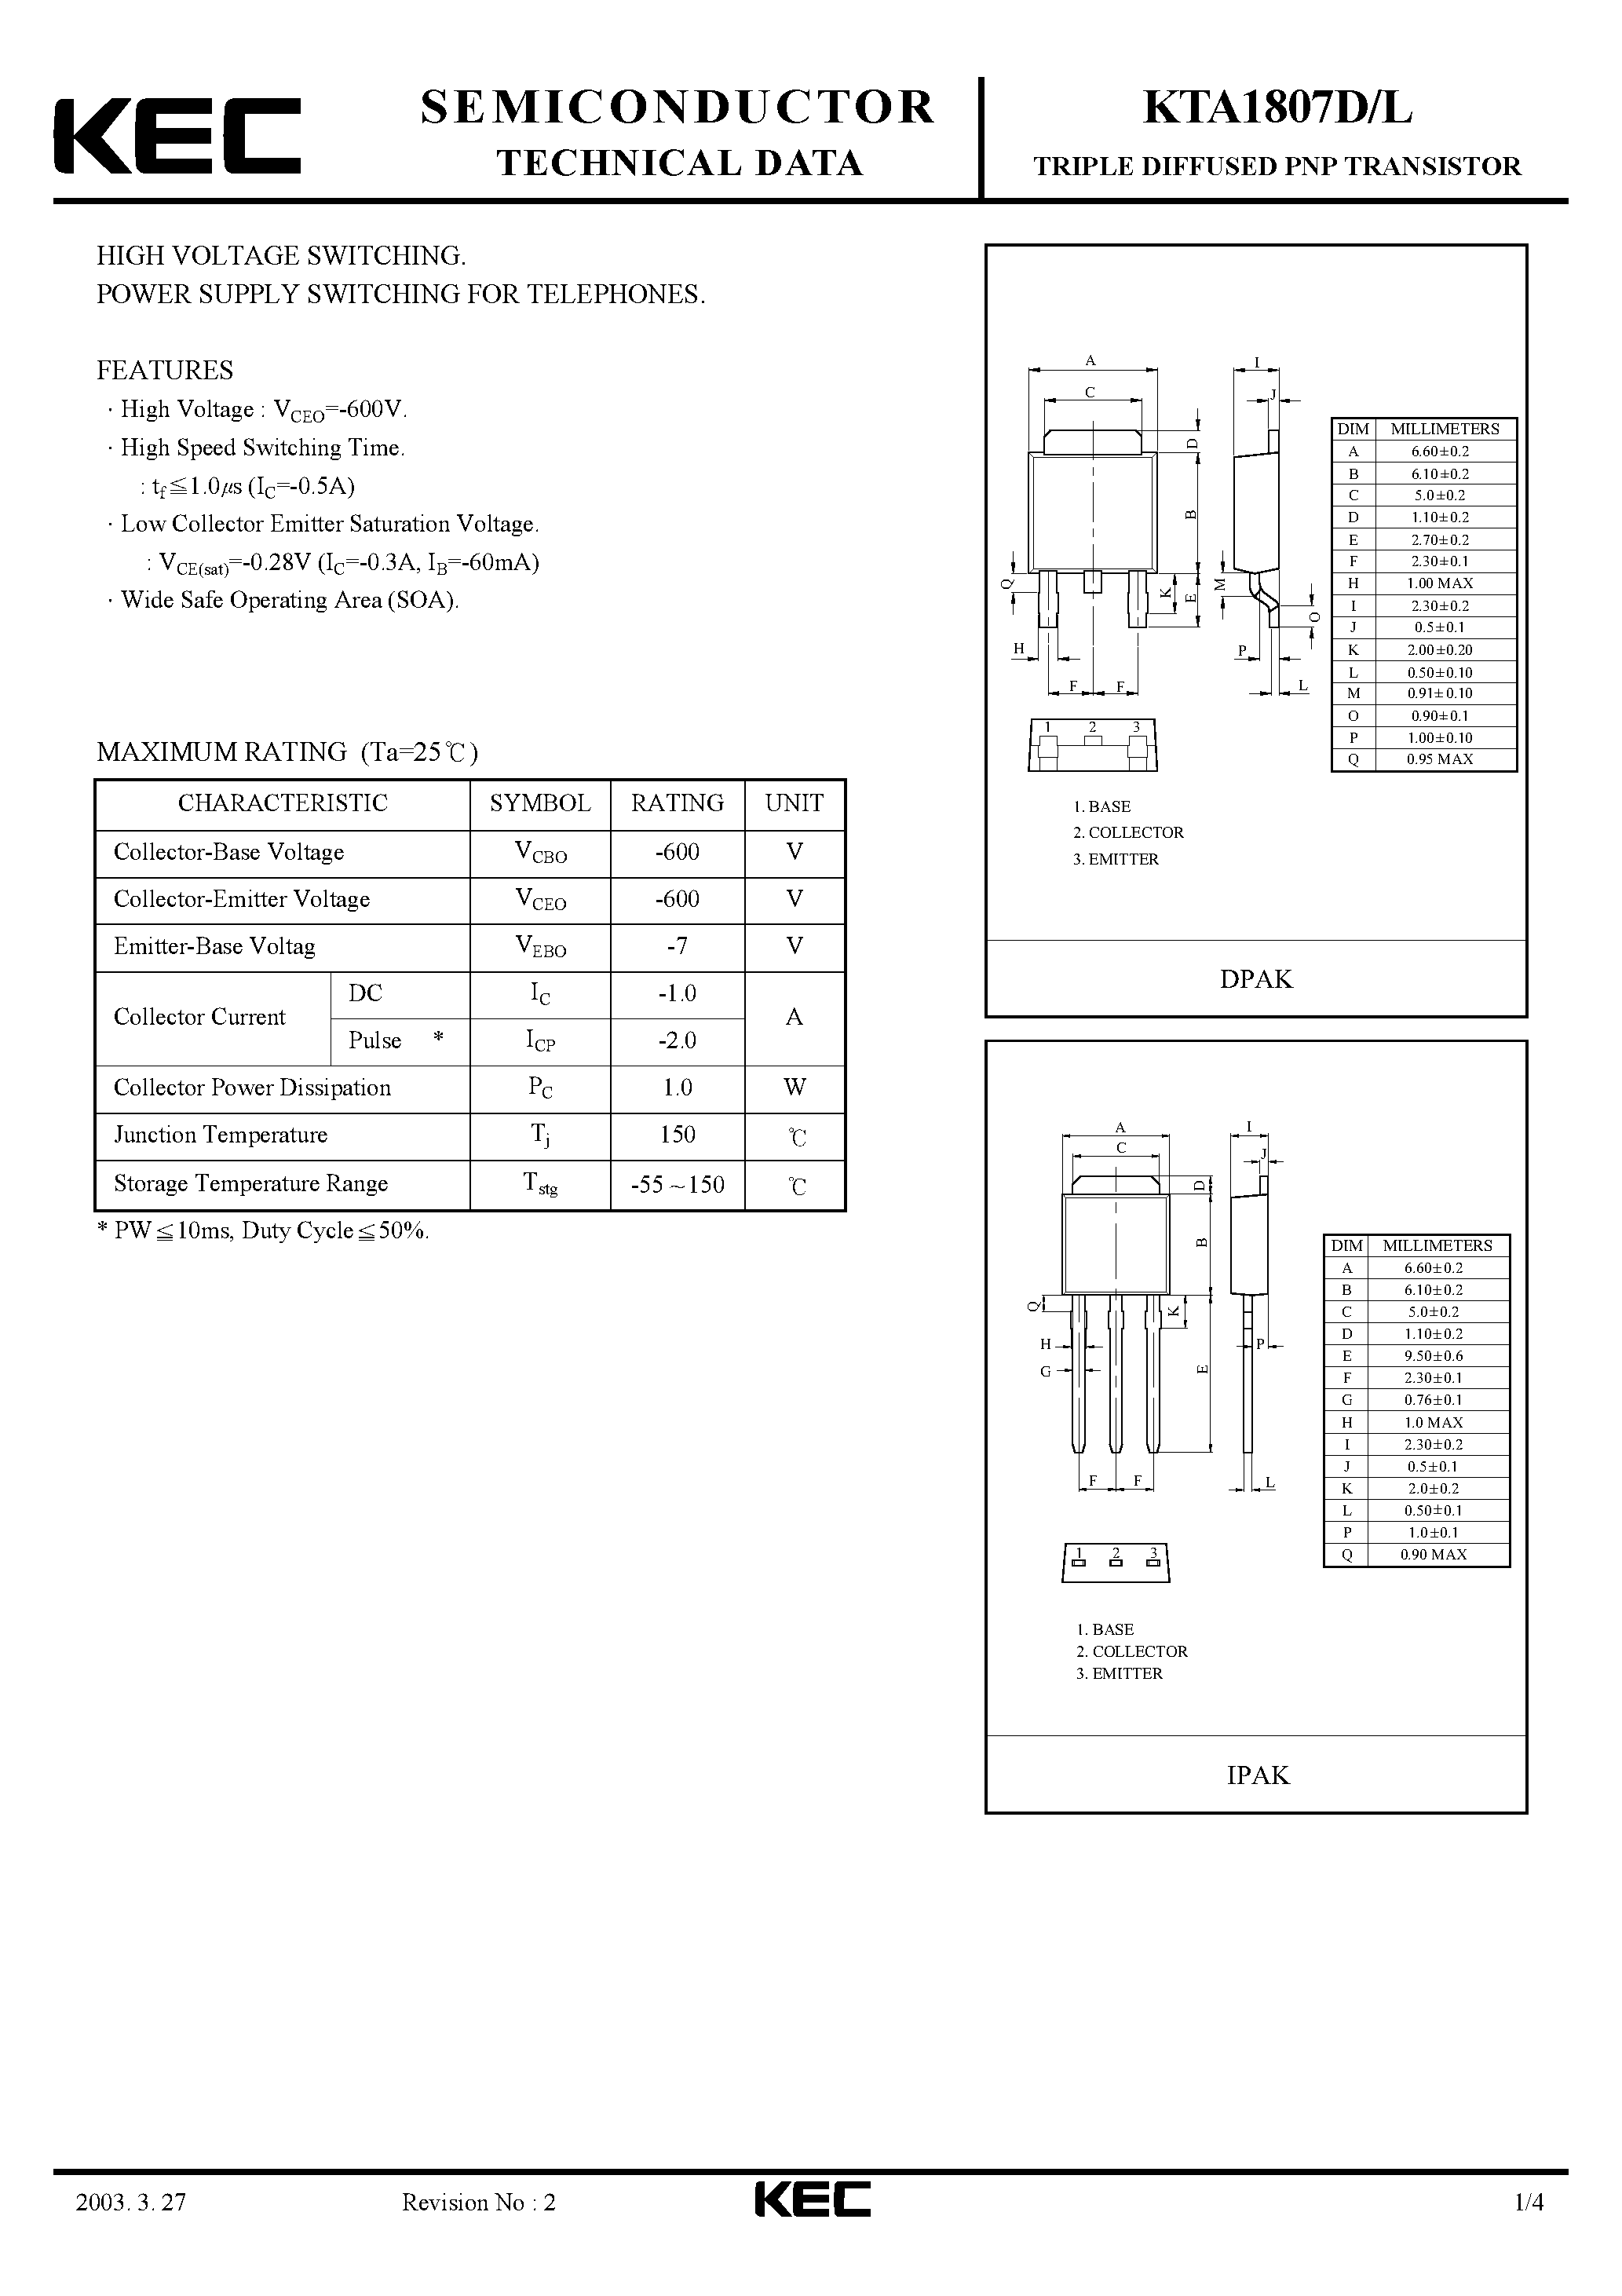 Datasheet KTA1807D - TRIPLE DIFFUSED PNP TRANSISTOR(HIGH VOLTAGE SWITCHING POWER SUPPLY SWITCHING FOR TELEPHONES) page 1